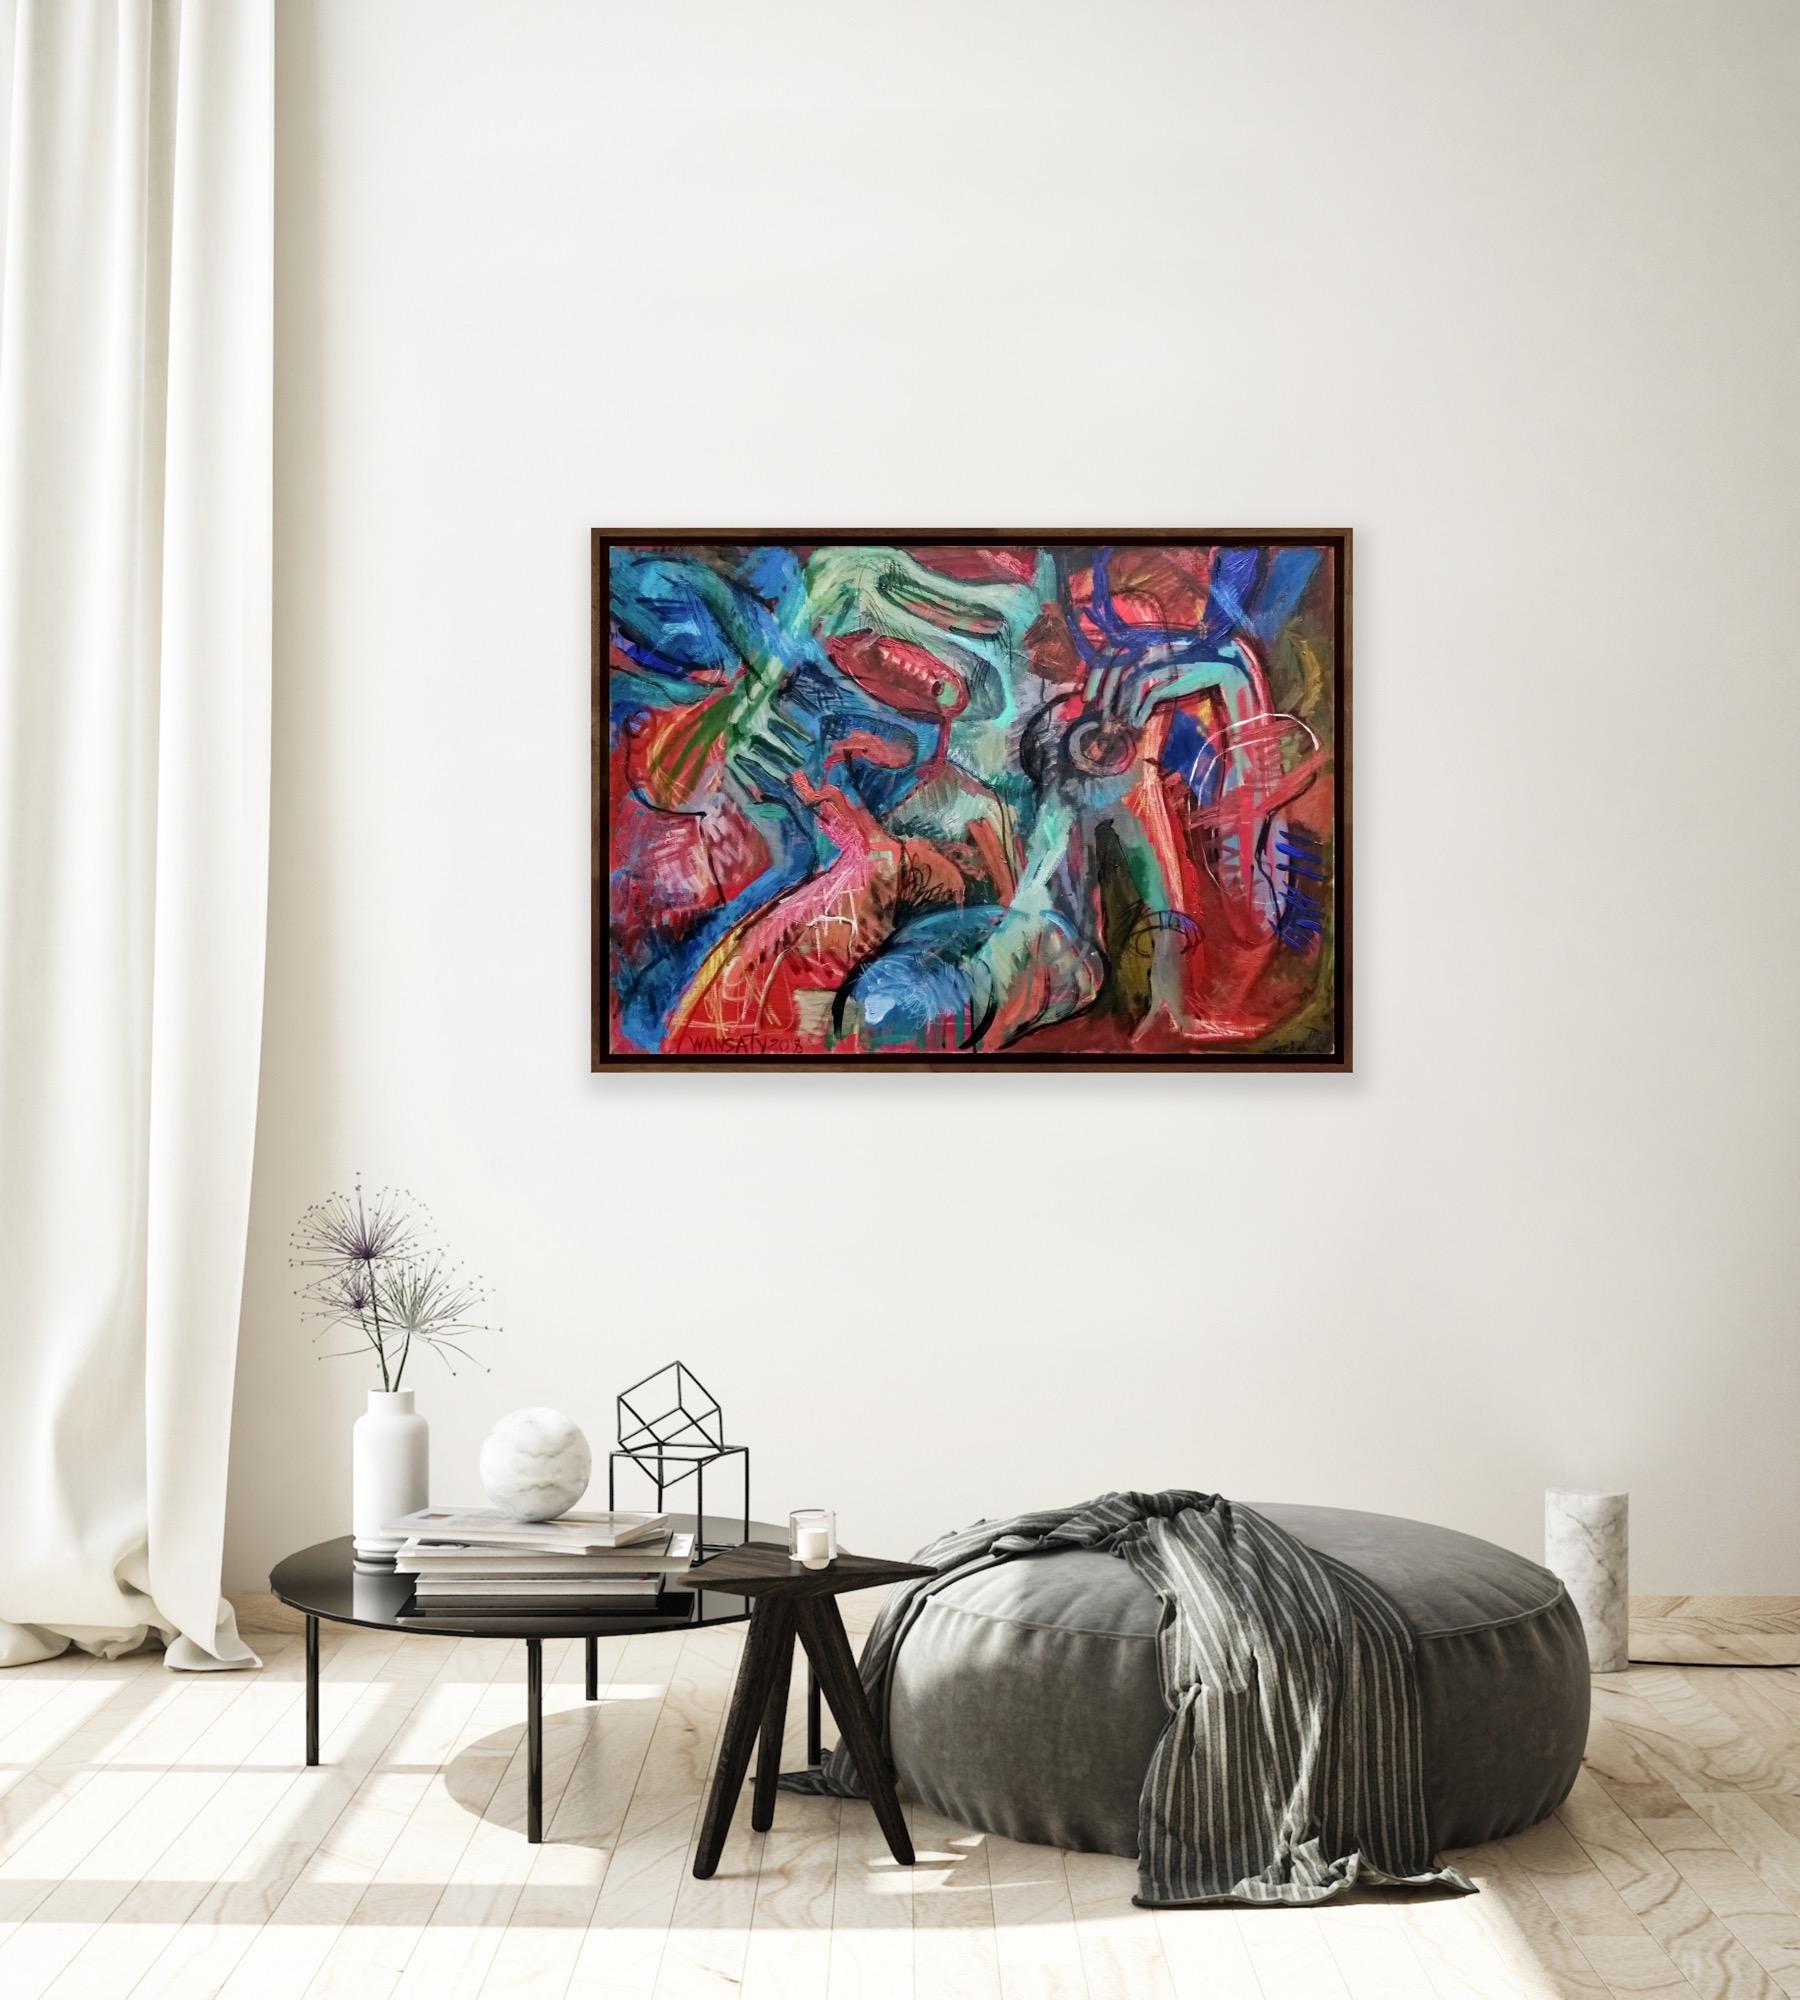 Immersion, 70x100cm - Neo-Expressionist Painting by Tatiana Levchenko